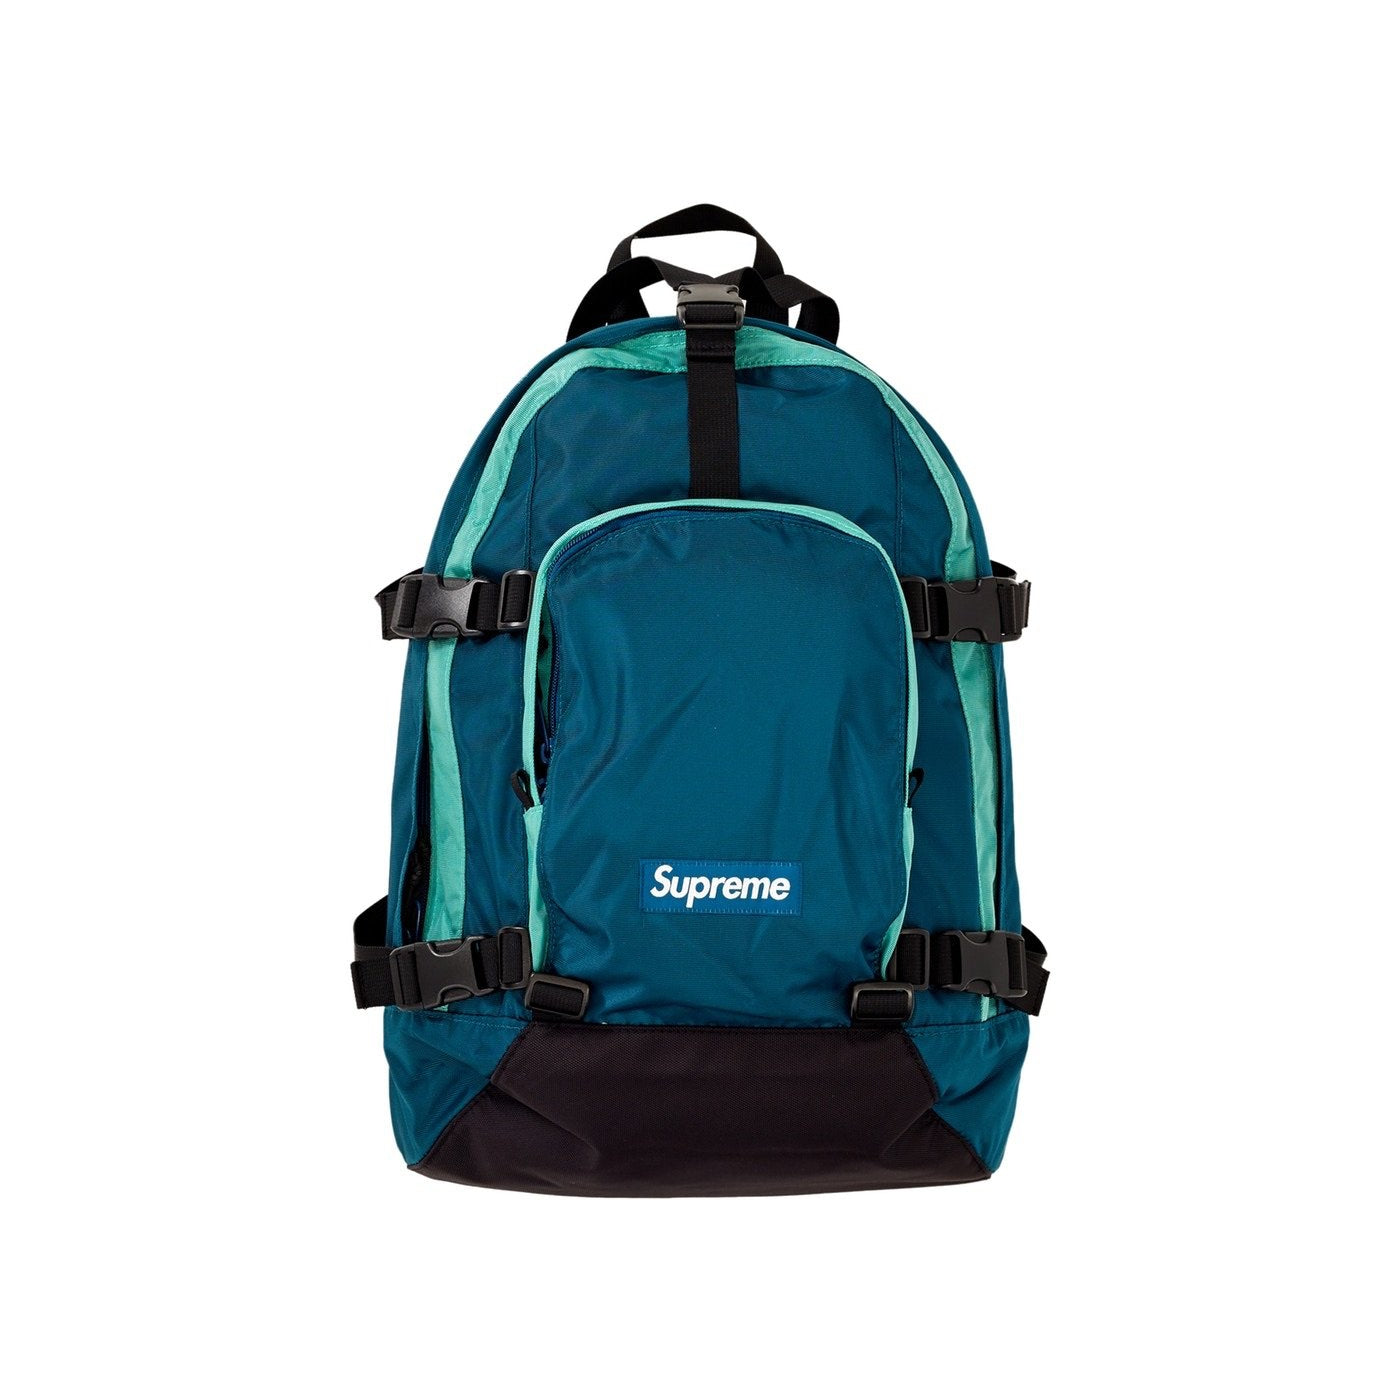 Supreme FW19 Back pack teal - Centrall Online